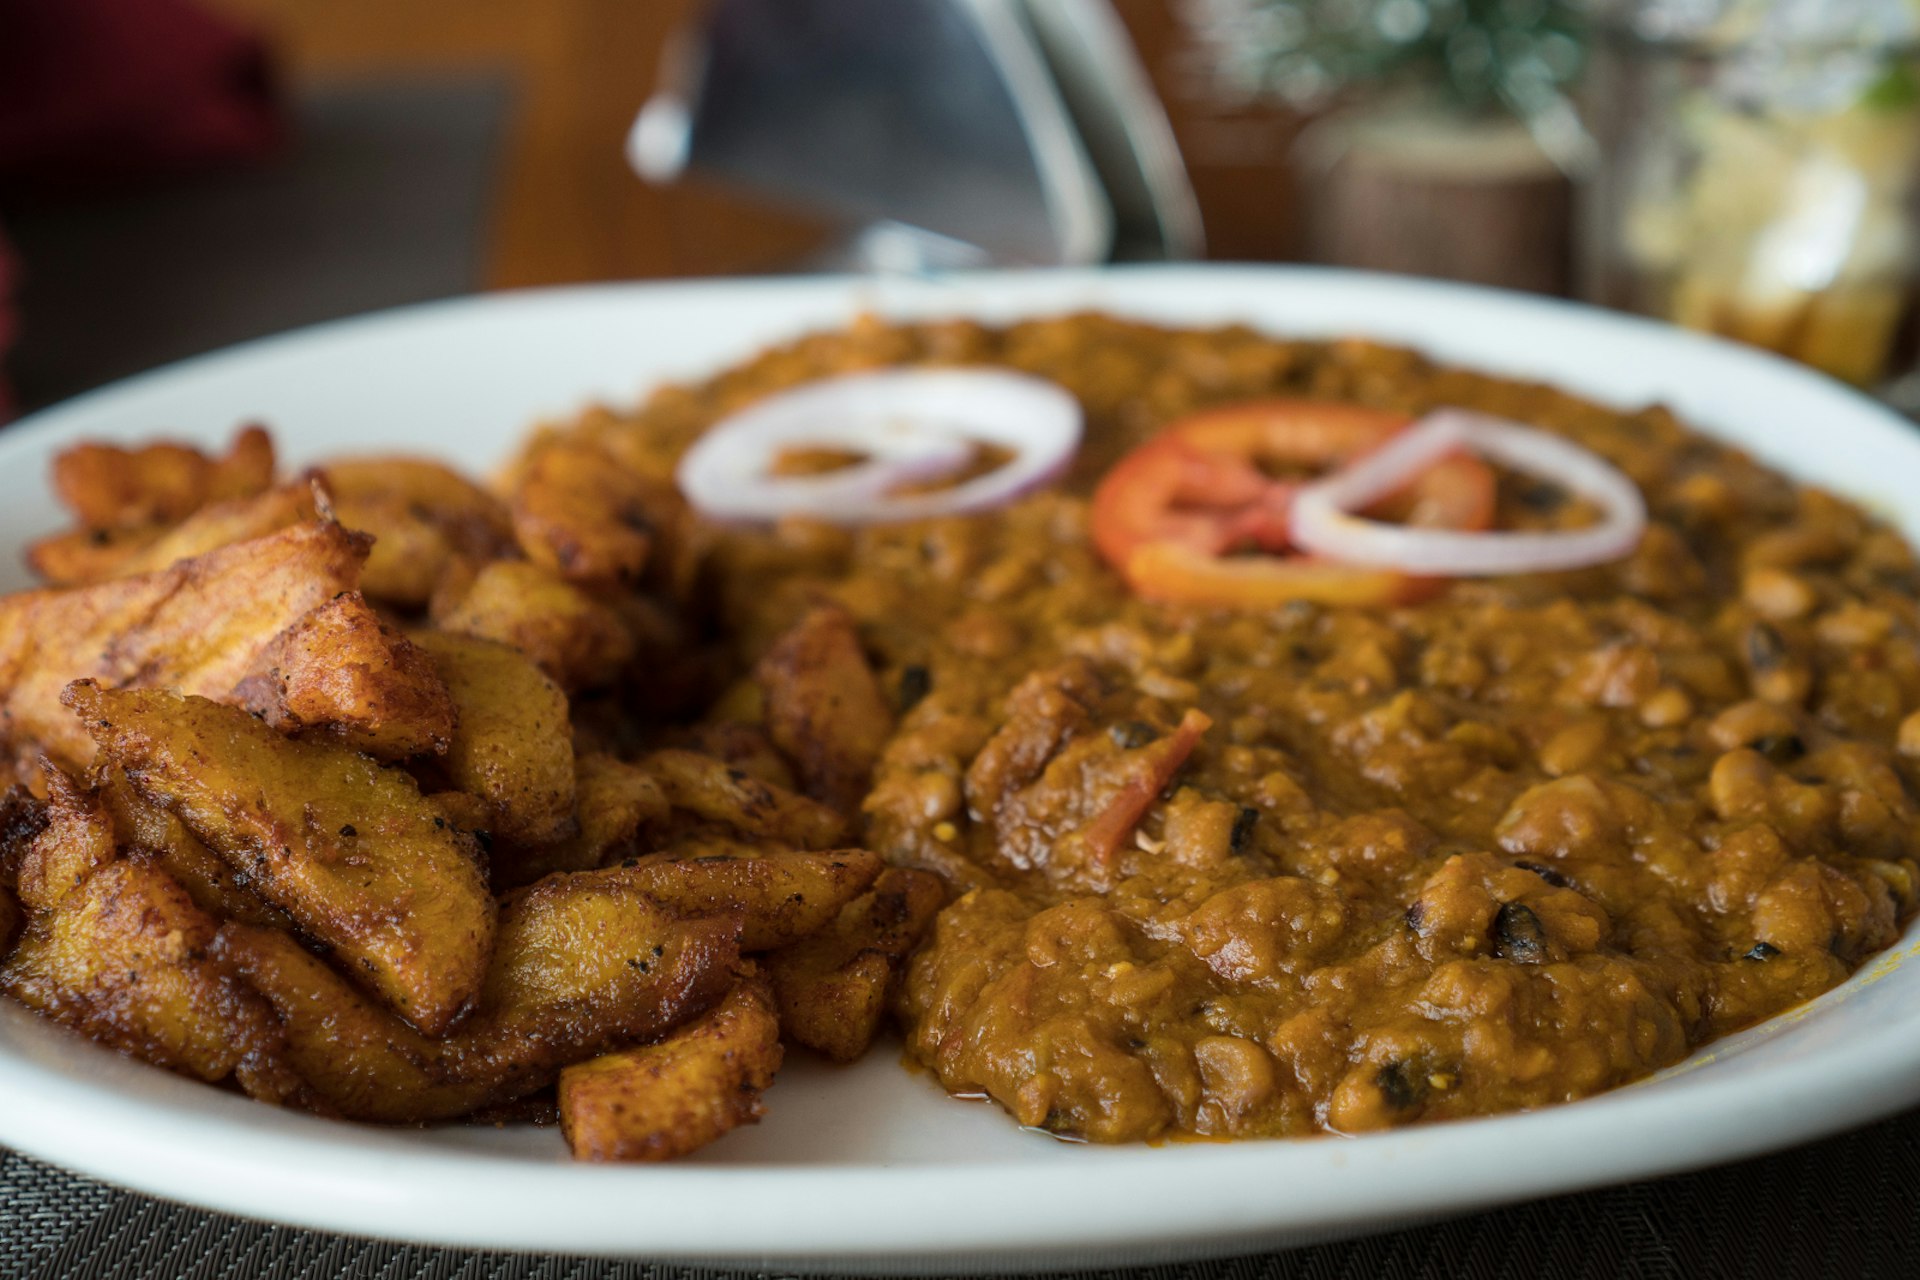 A close-up of the local dish red-red, a combination of fried plantains and stew made from black-eyed beans, palm oil and tomatoes. Atop the stew are some raw rings of onions and a sliced tomato © Elio Stamm / Lonely Planet